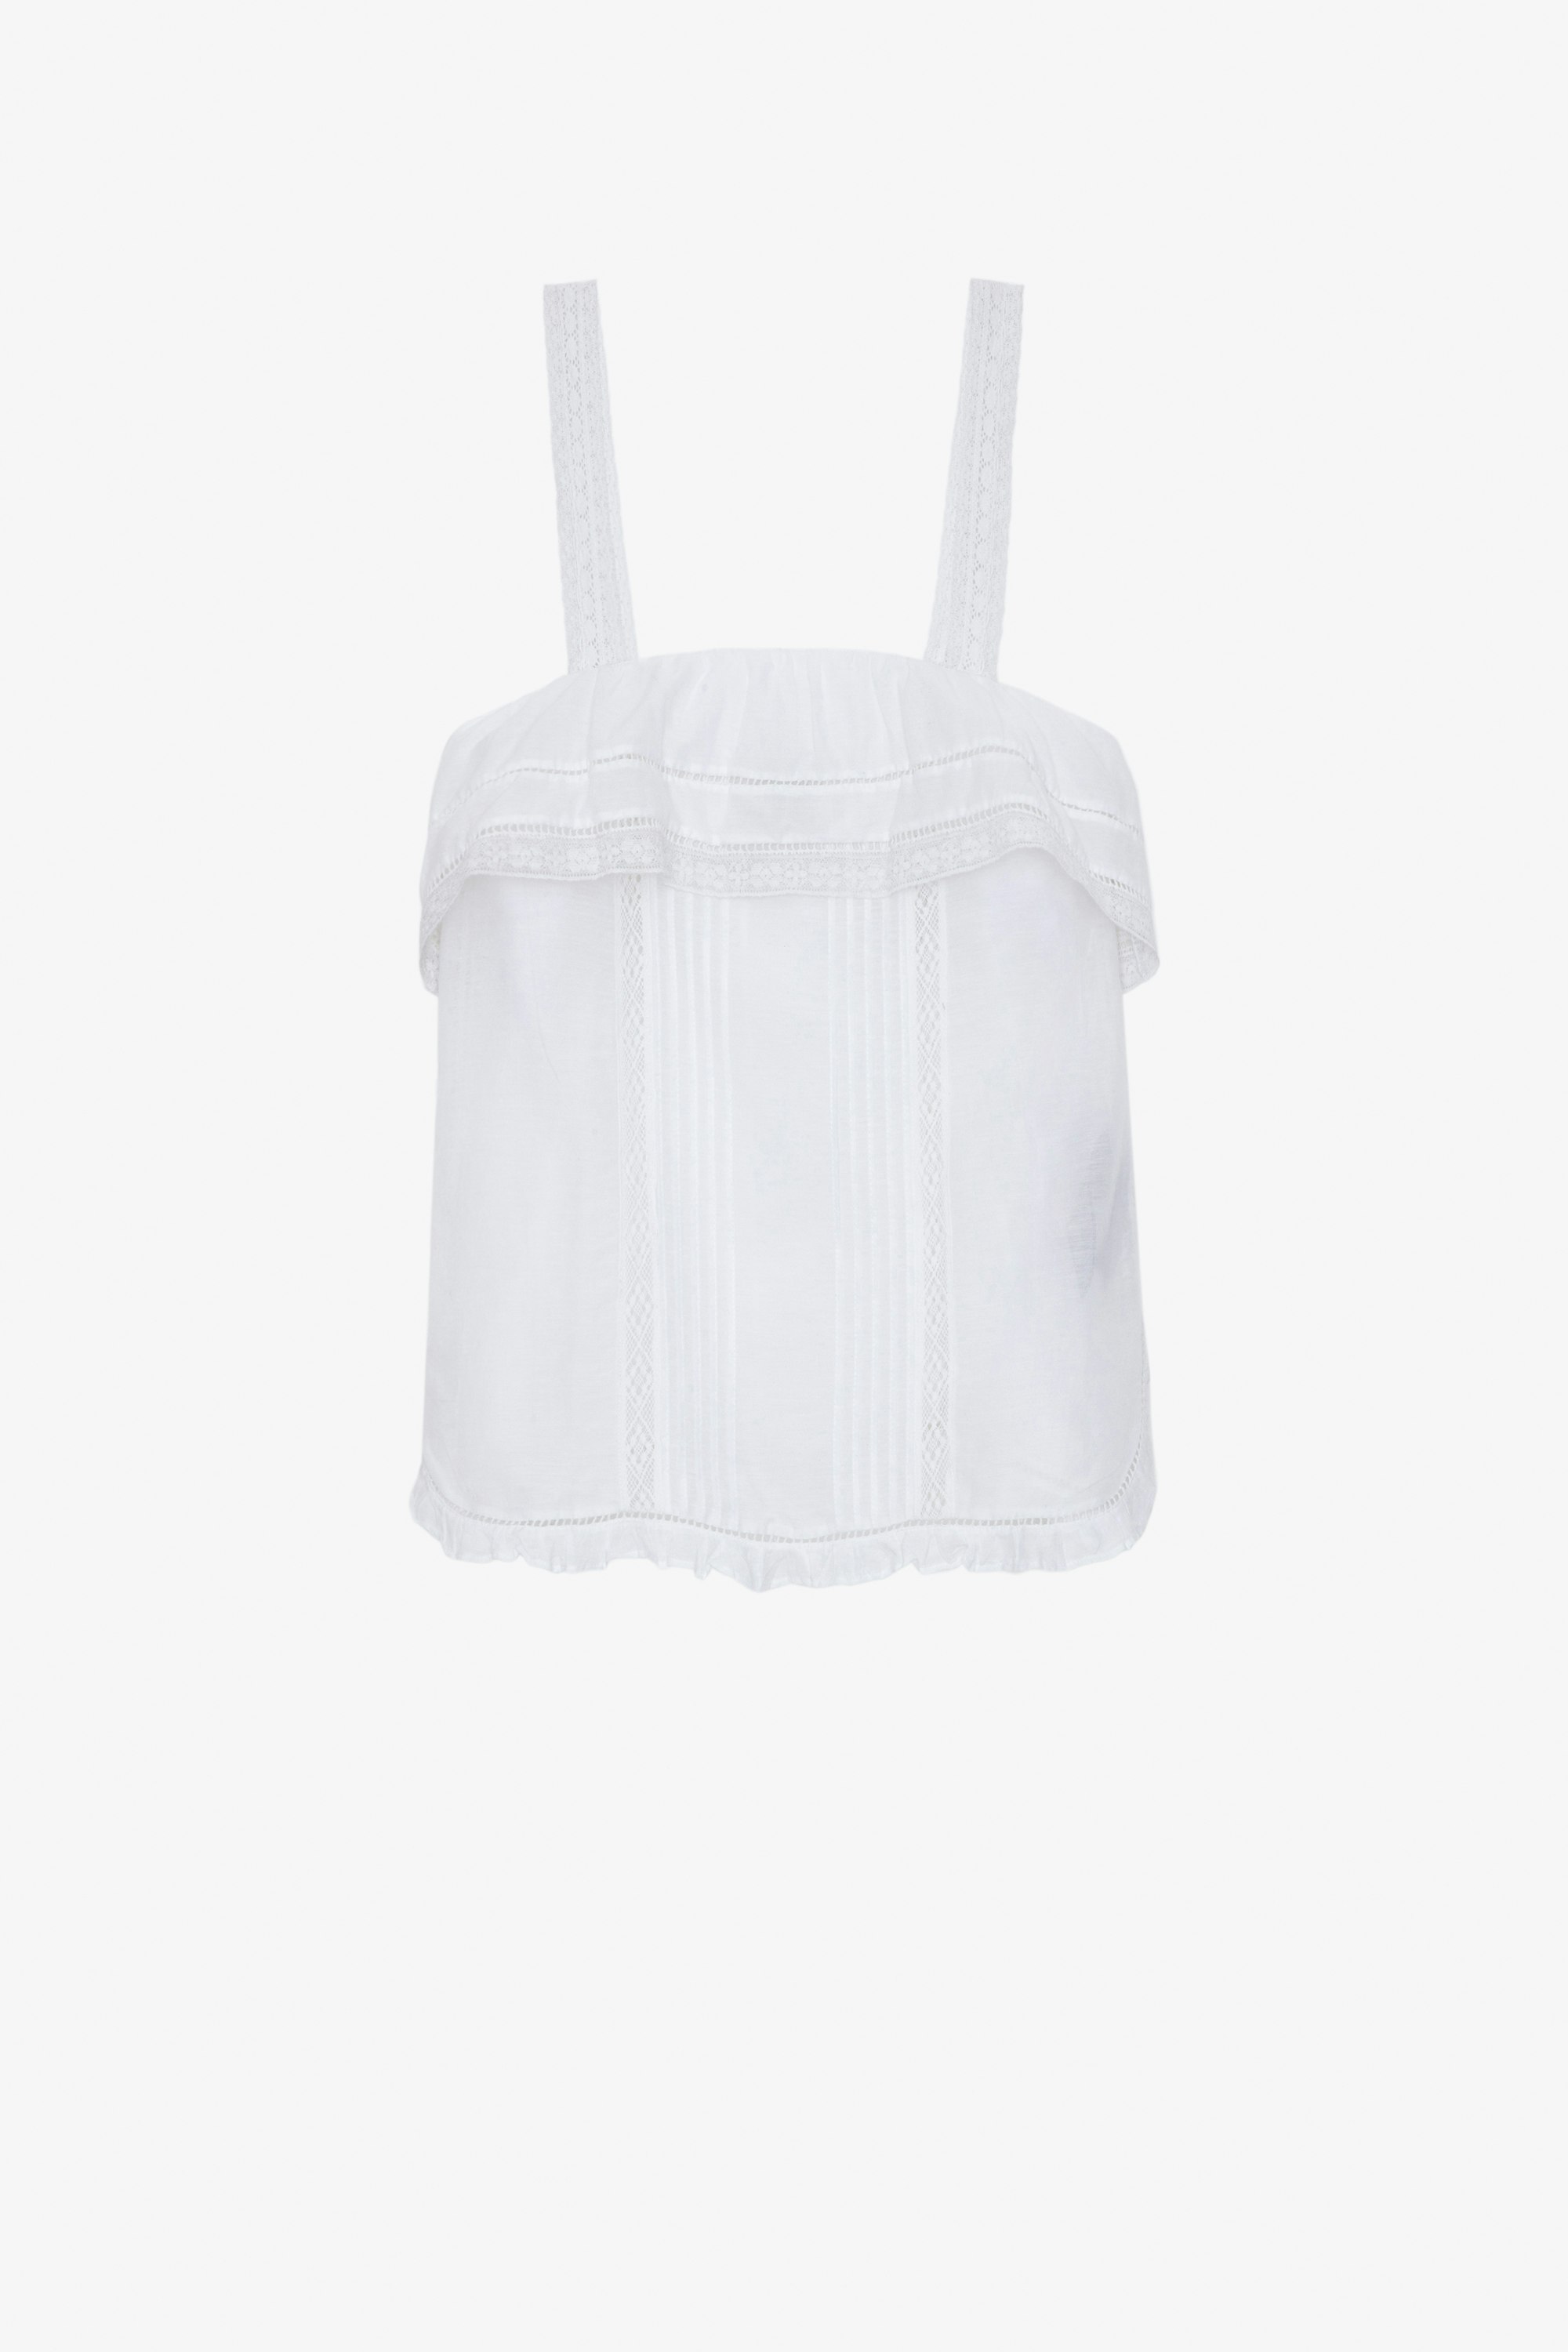 Cya Camisole Women's off-white camisole with guipure ruffles